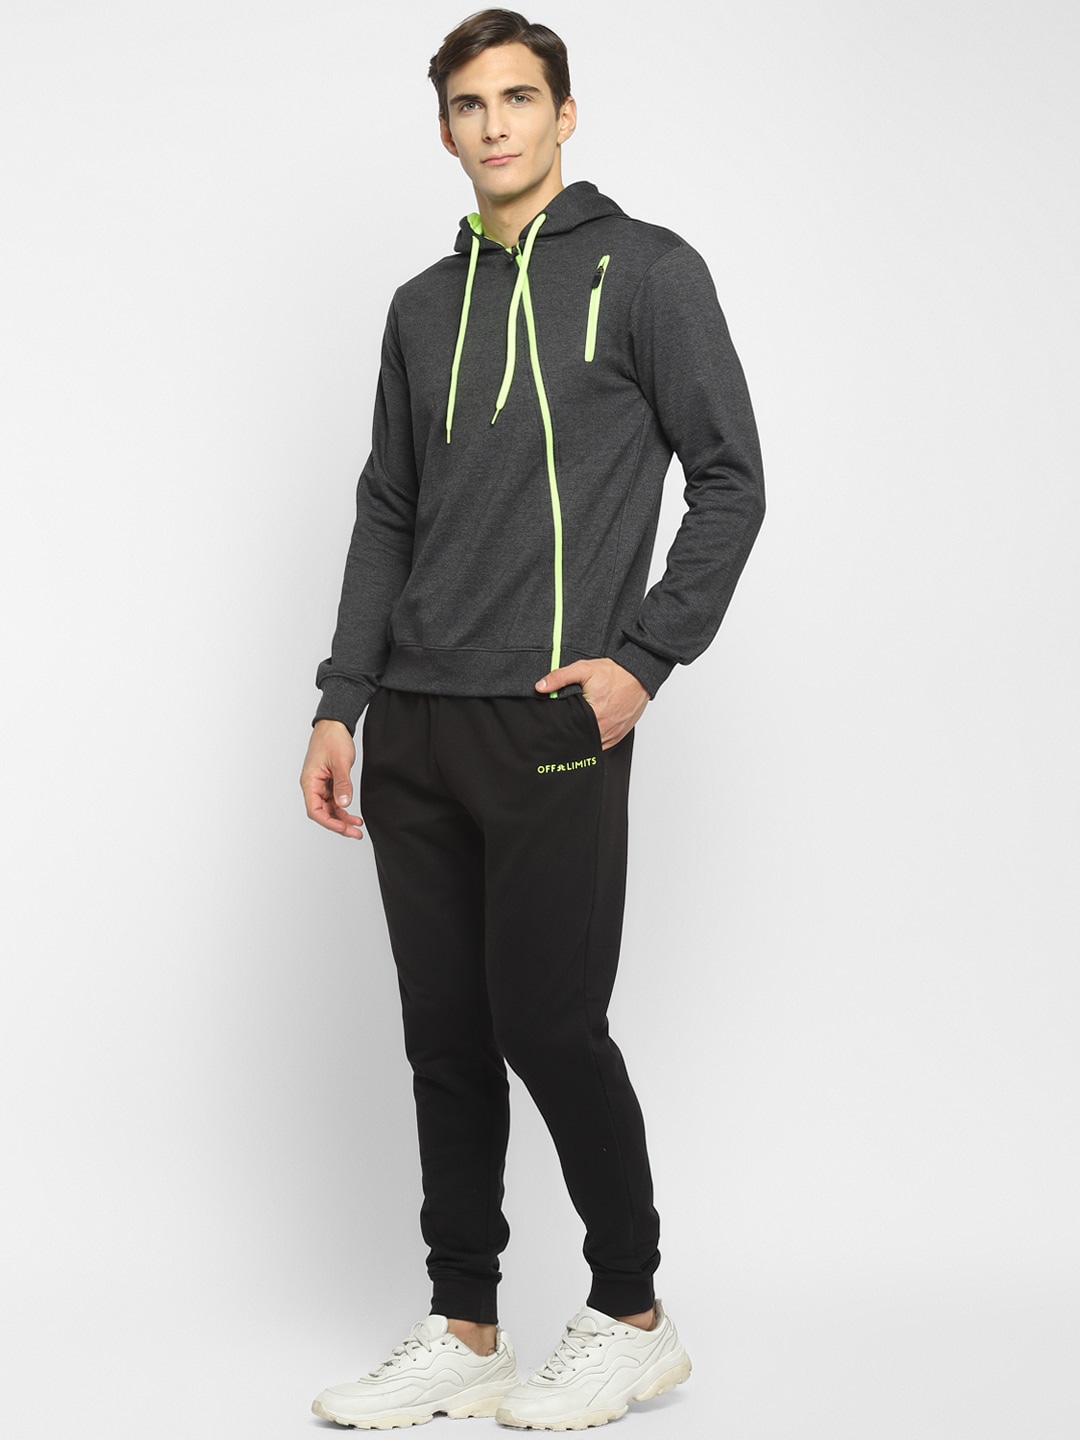 Clothing Tracksuits | OFF LIMITS Men Charcoal Grey & Black Solid Track Suit - QB11188